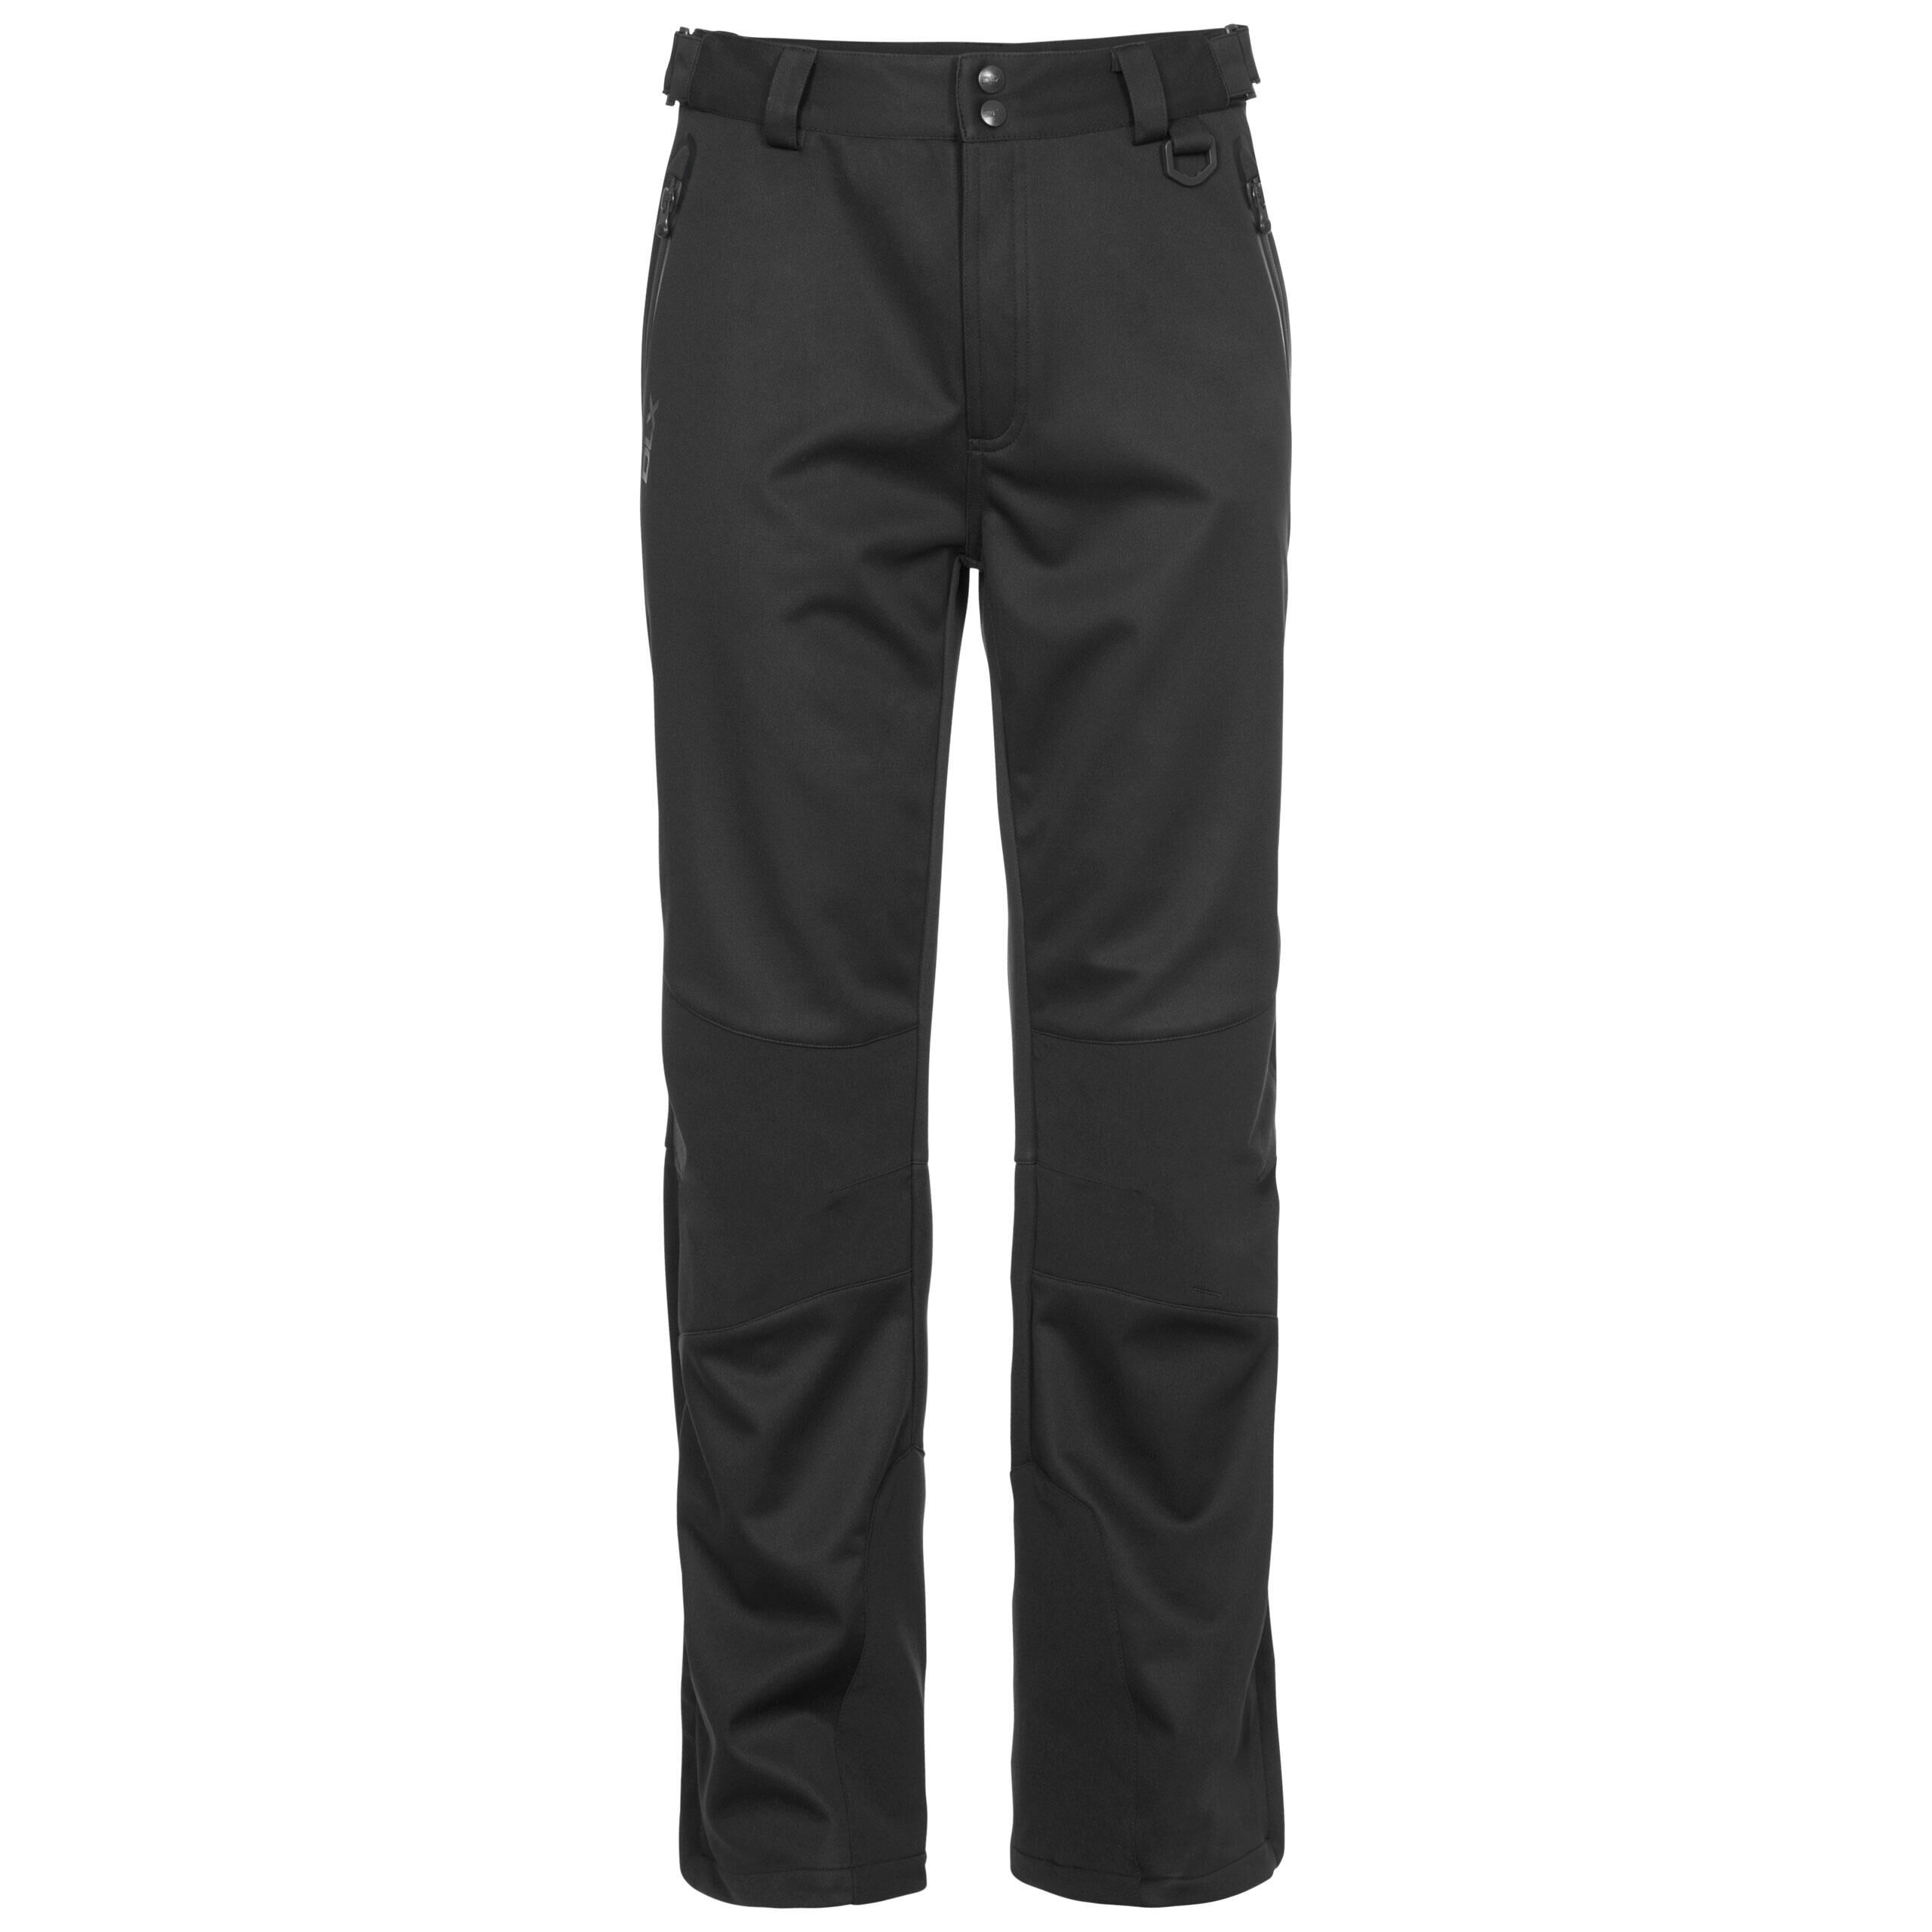 DLX Mens Walking Trousers Cargo Pant Hiking Holloway